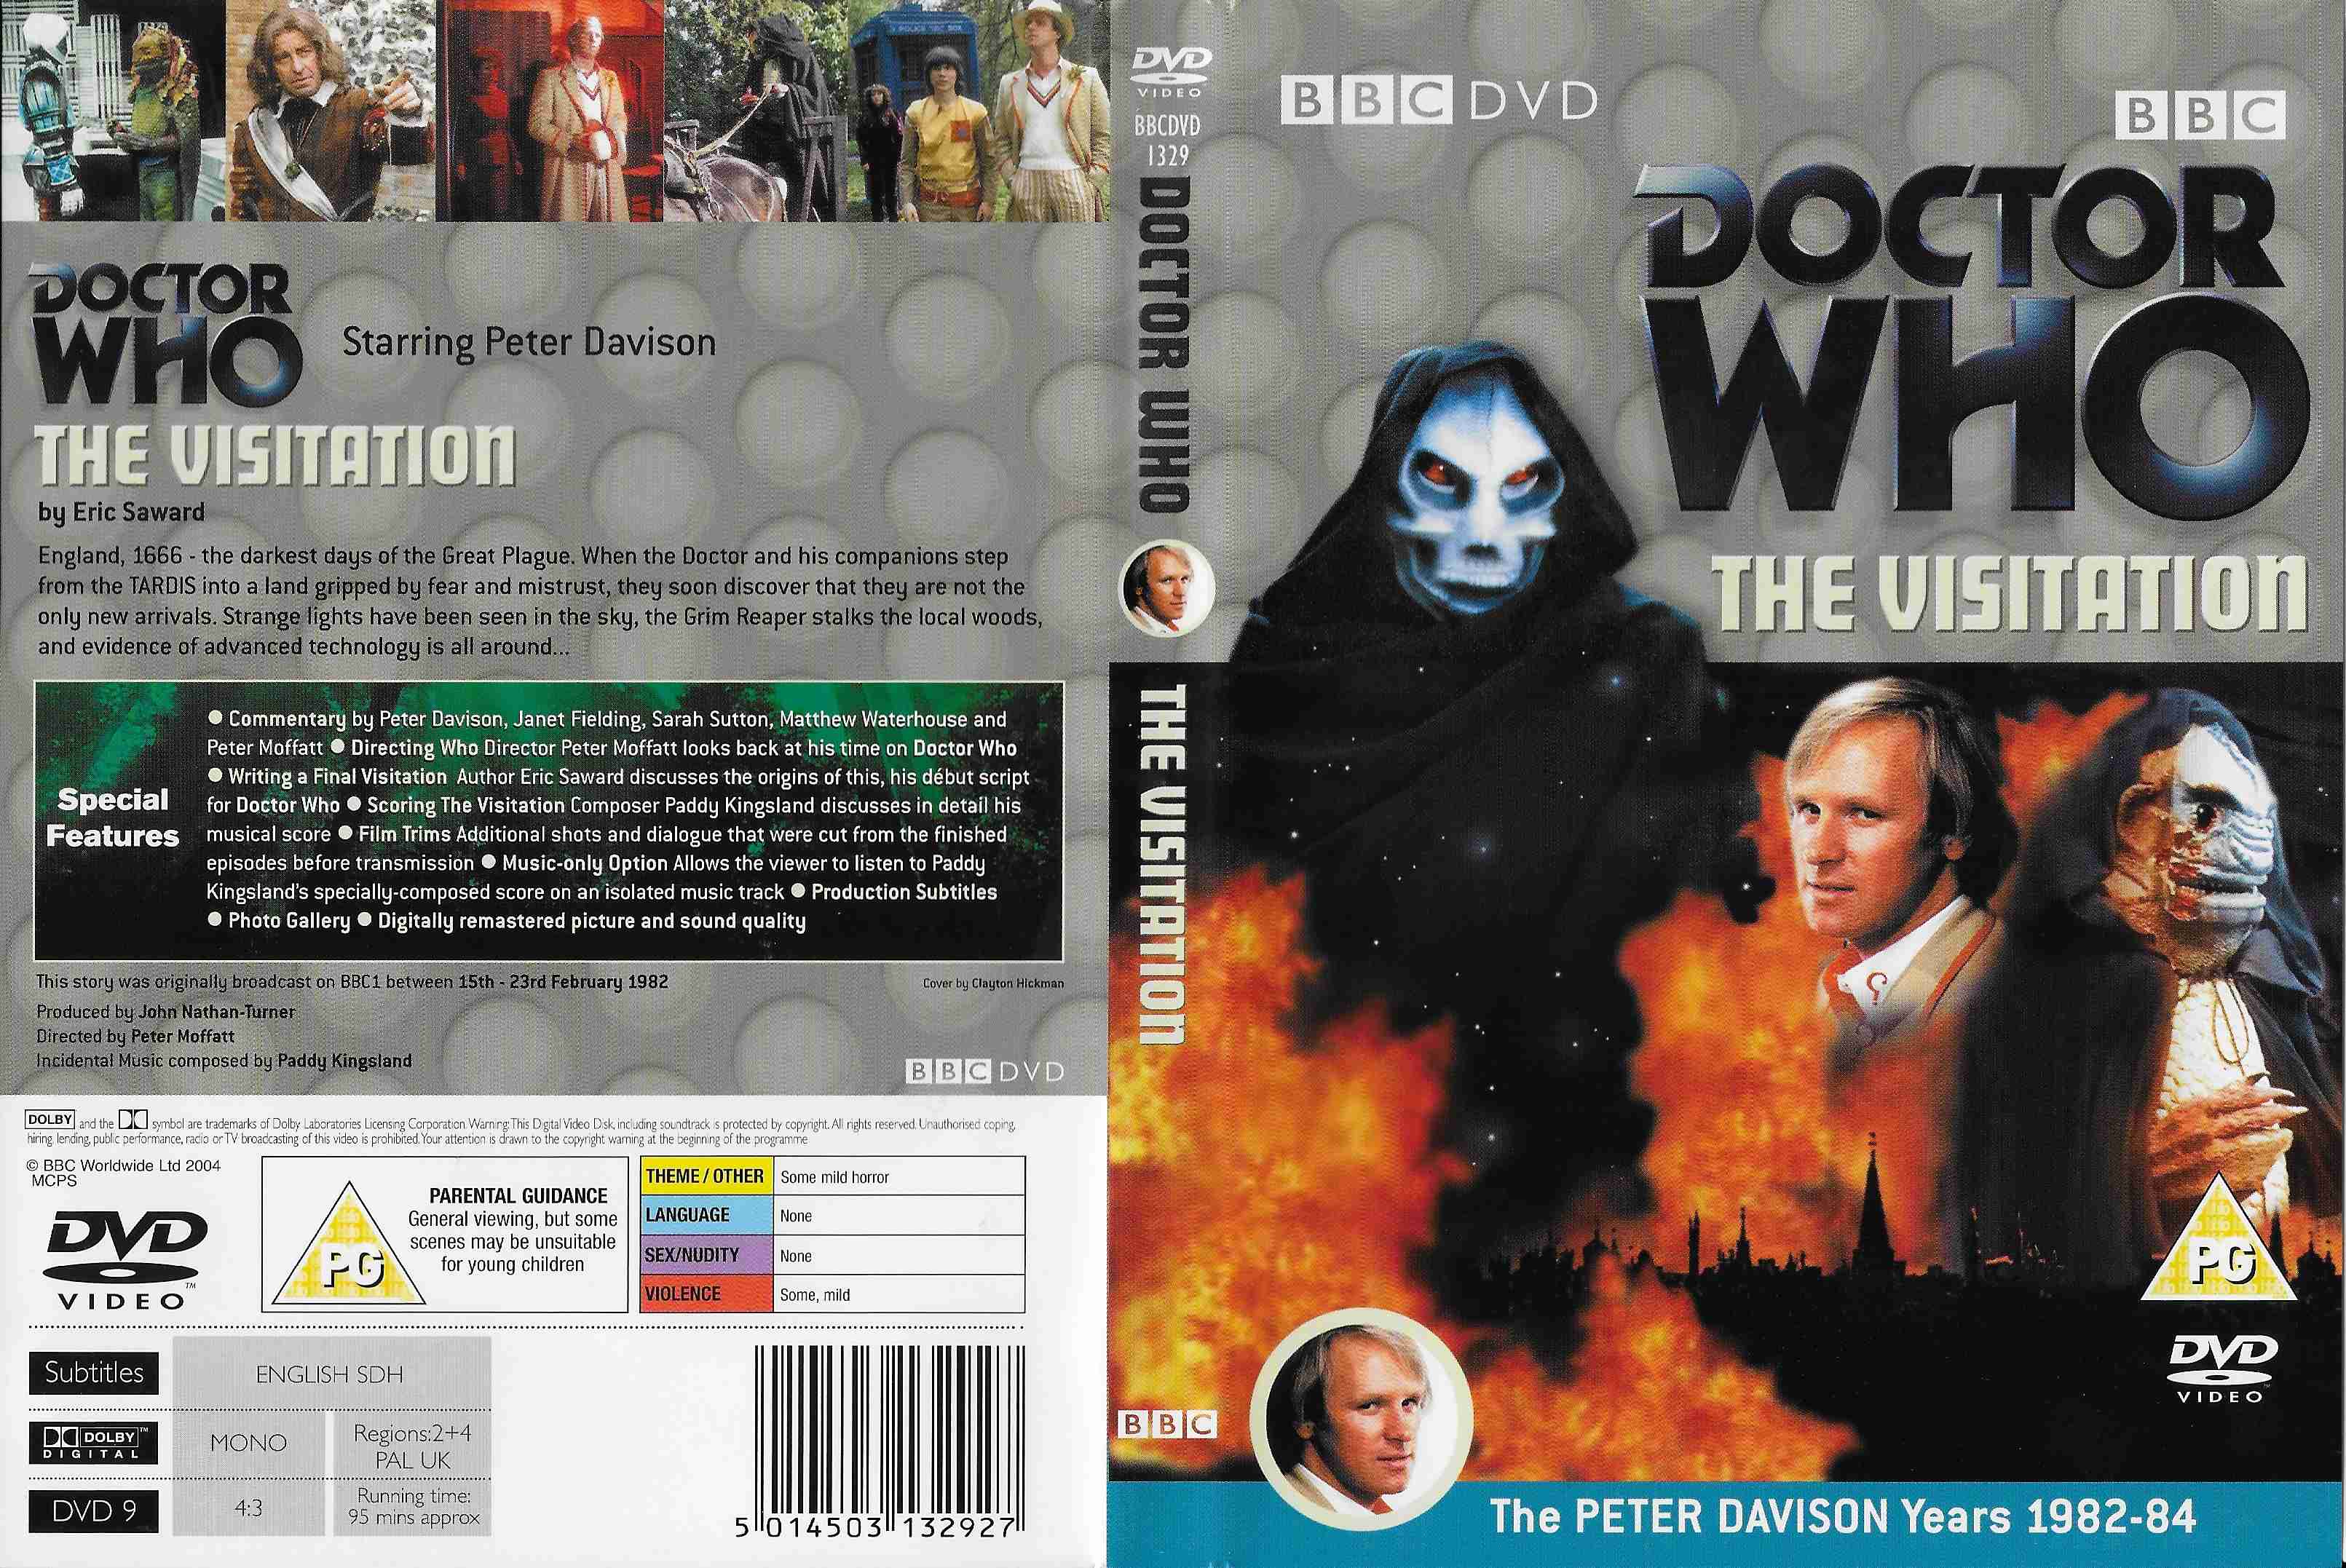 Picture of BBCDVD 1329 Doctor Who - The visitation by artist Terence Dudley from the BBC records and Tapes library